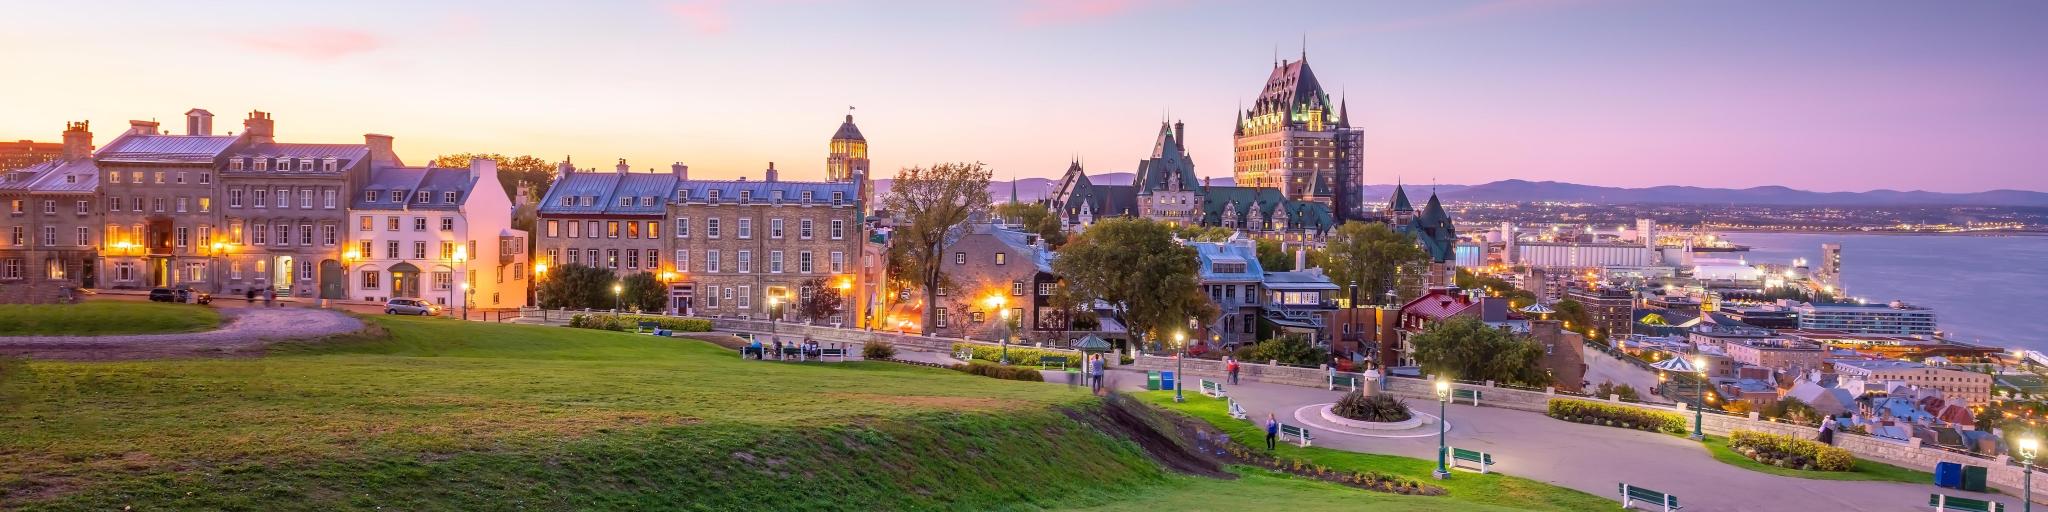 Quebec City, Canada taken as a panoramic view of Quebec City skyline with Saint Lawrence river at sunset.